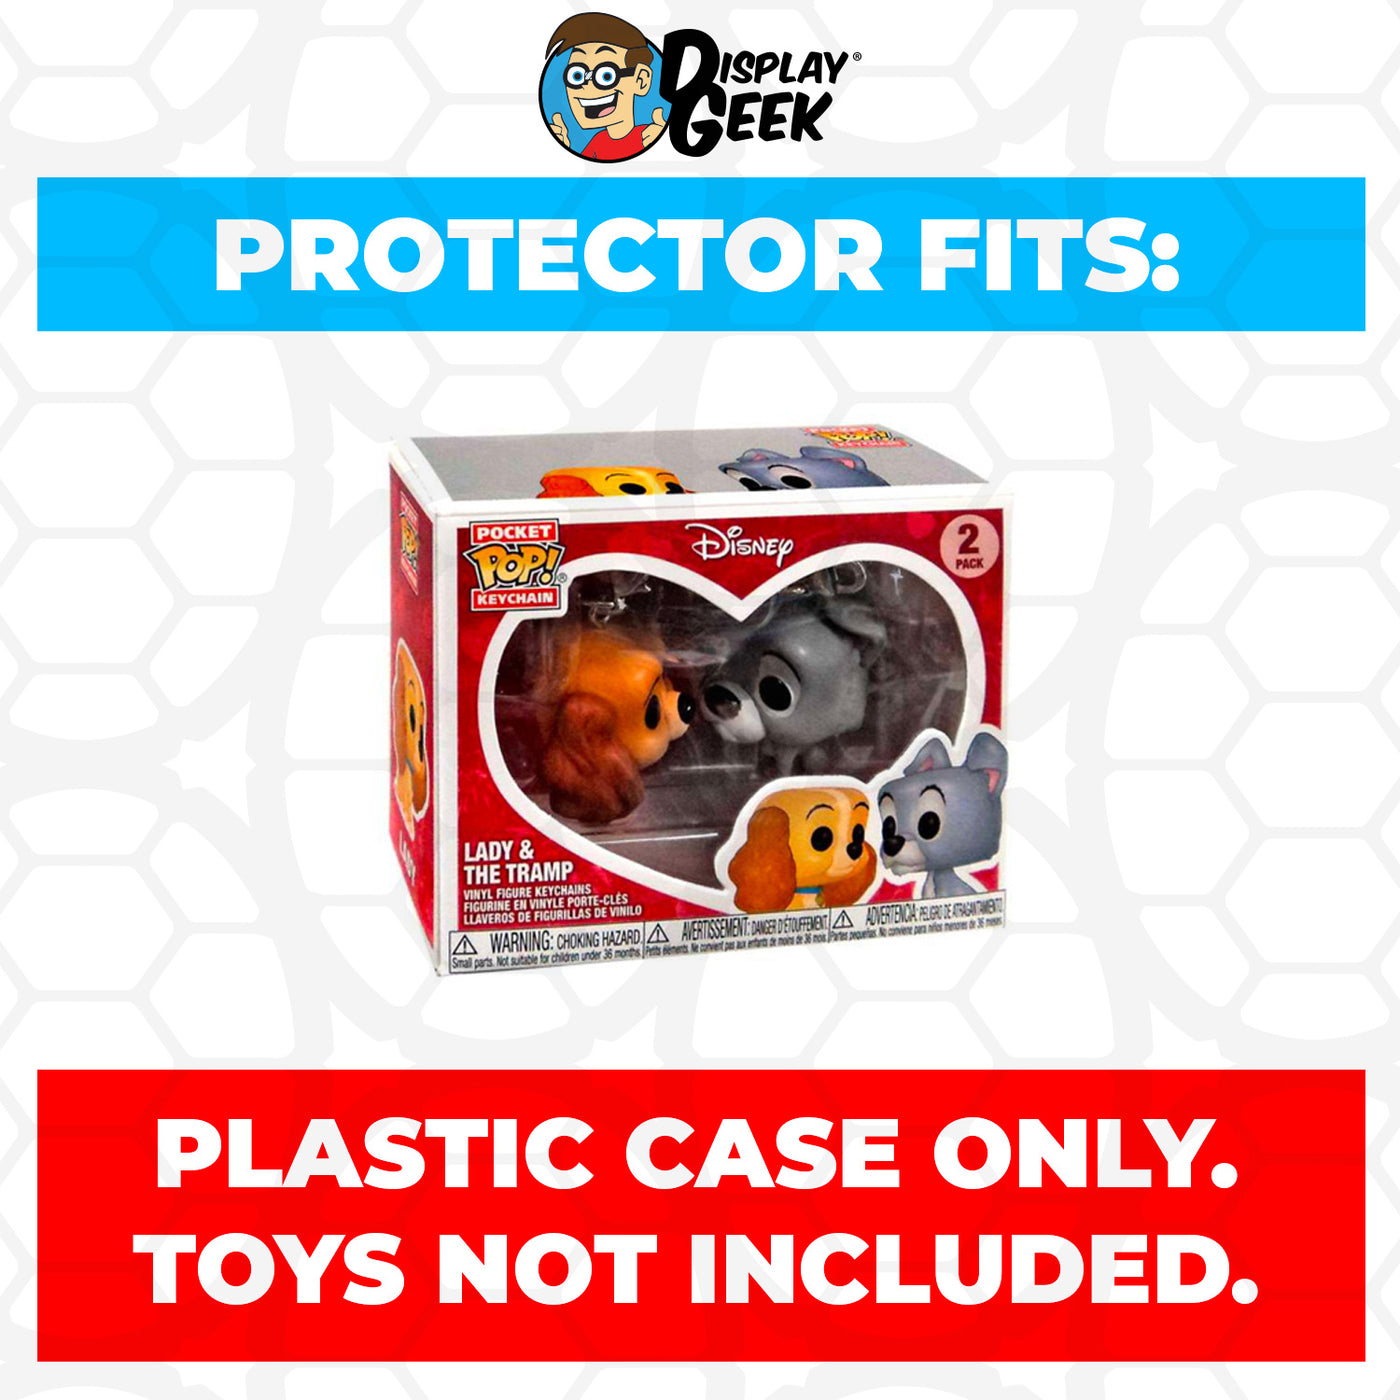 Pop Protector for 2 Pack Lady and the Tramp Funko Pocket Pop Keychains on The Protector Guide App by Display Geek